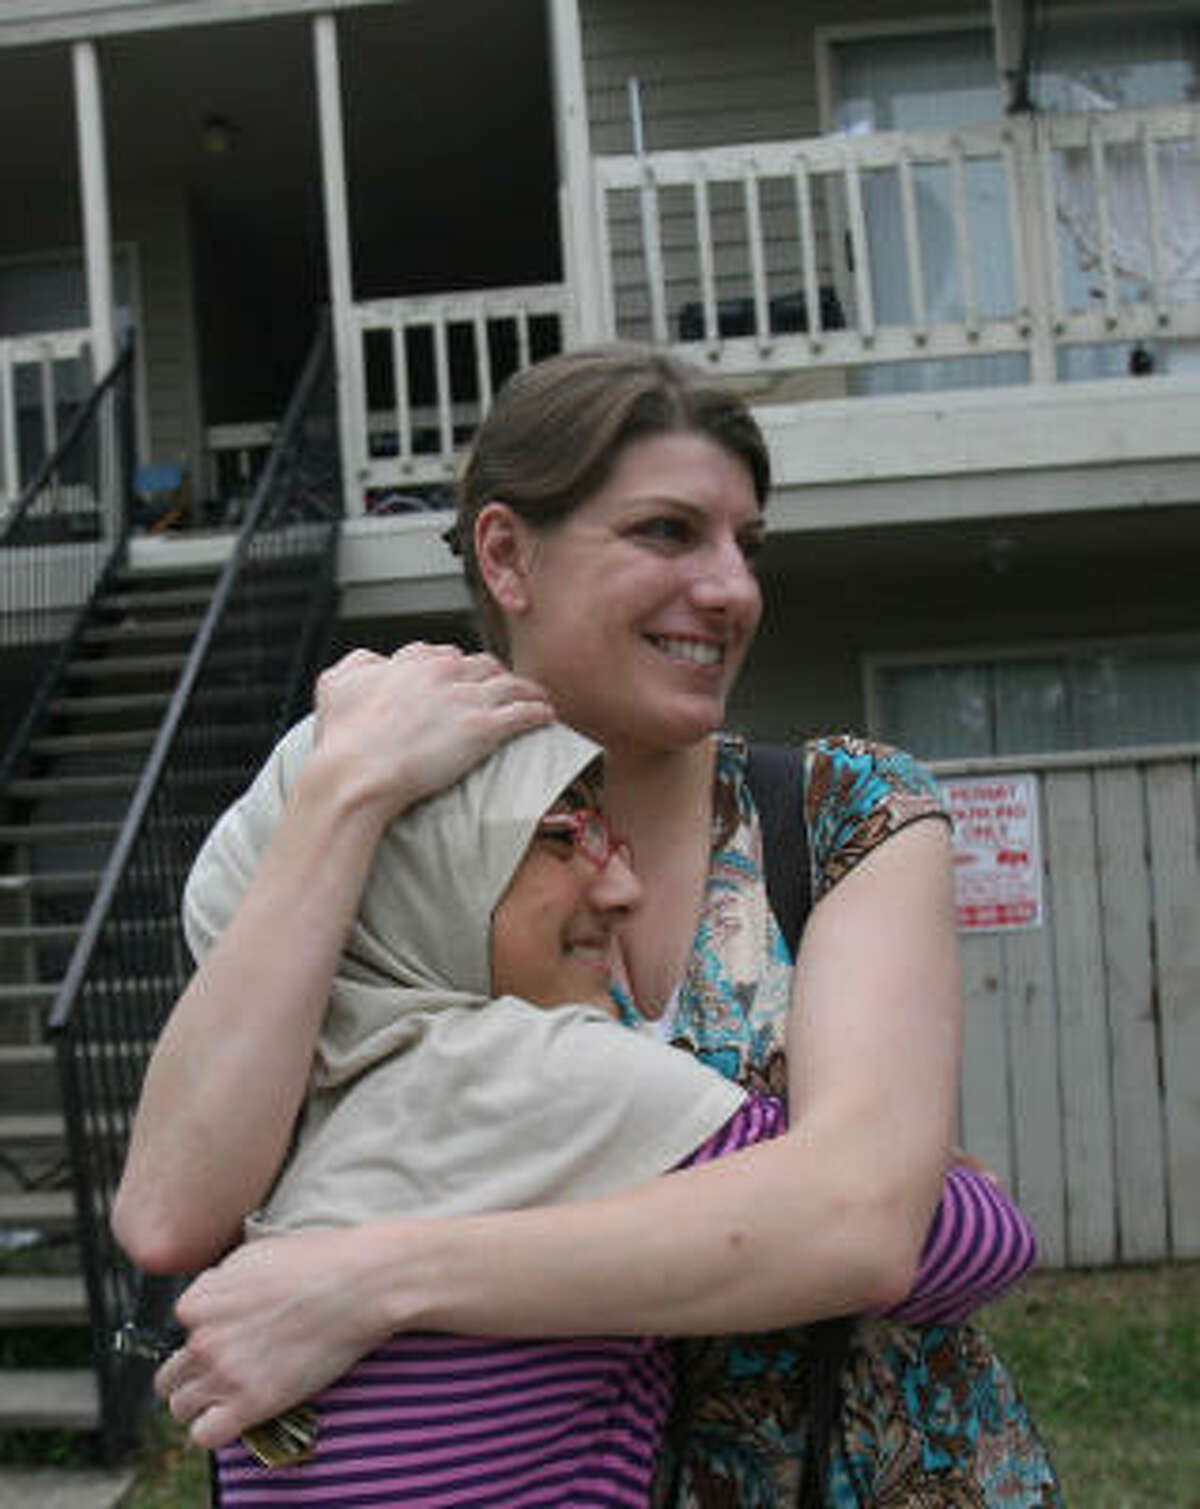 Marzia Bostani, 11, says goodbye Thursday to Liz Valette outside the Afghan refugee’s southwest Houston apartment. The 31-year-old former Army captain spent a year in Iraq, and now is heading to Afghanistan to work as a humanitarian aid worker